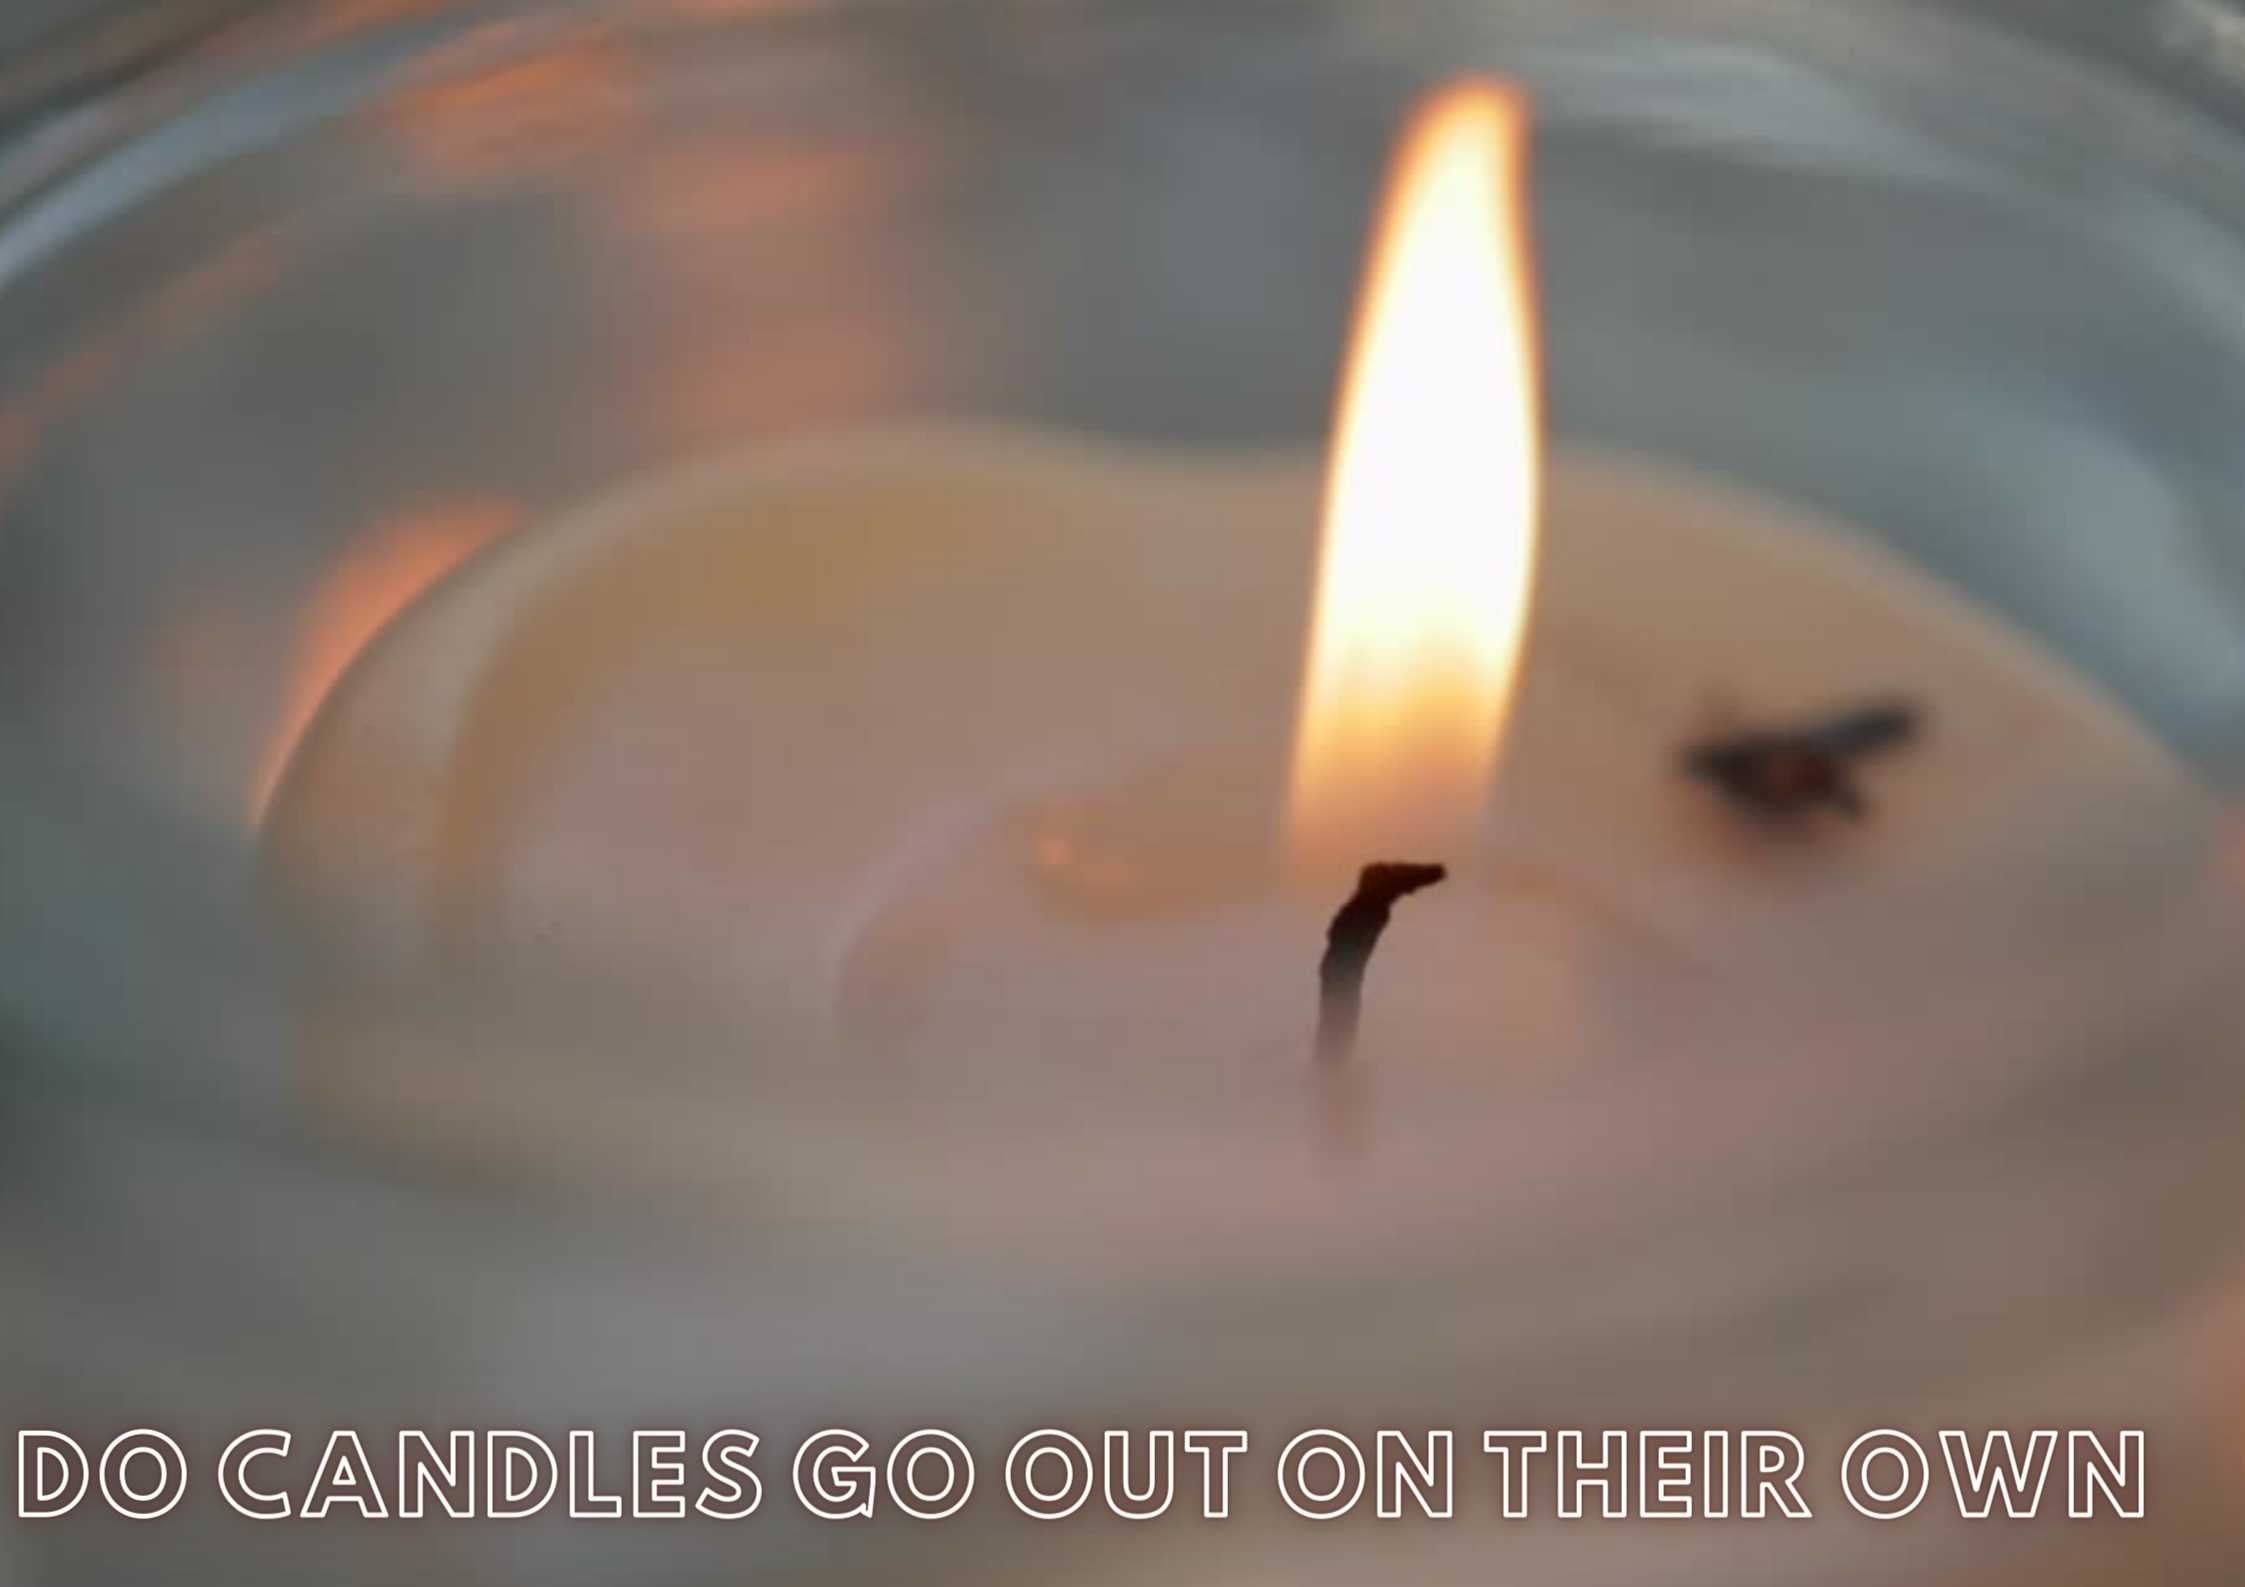 Do candles go out on their own?